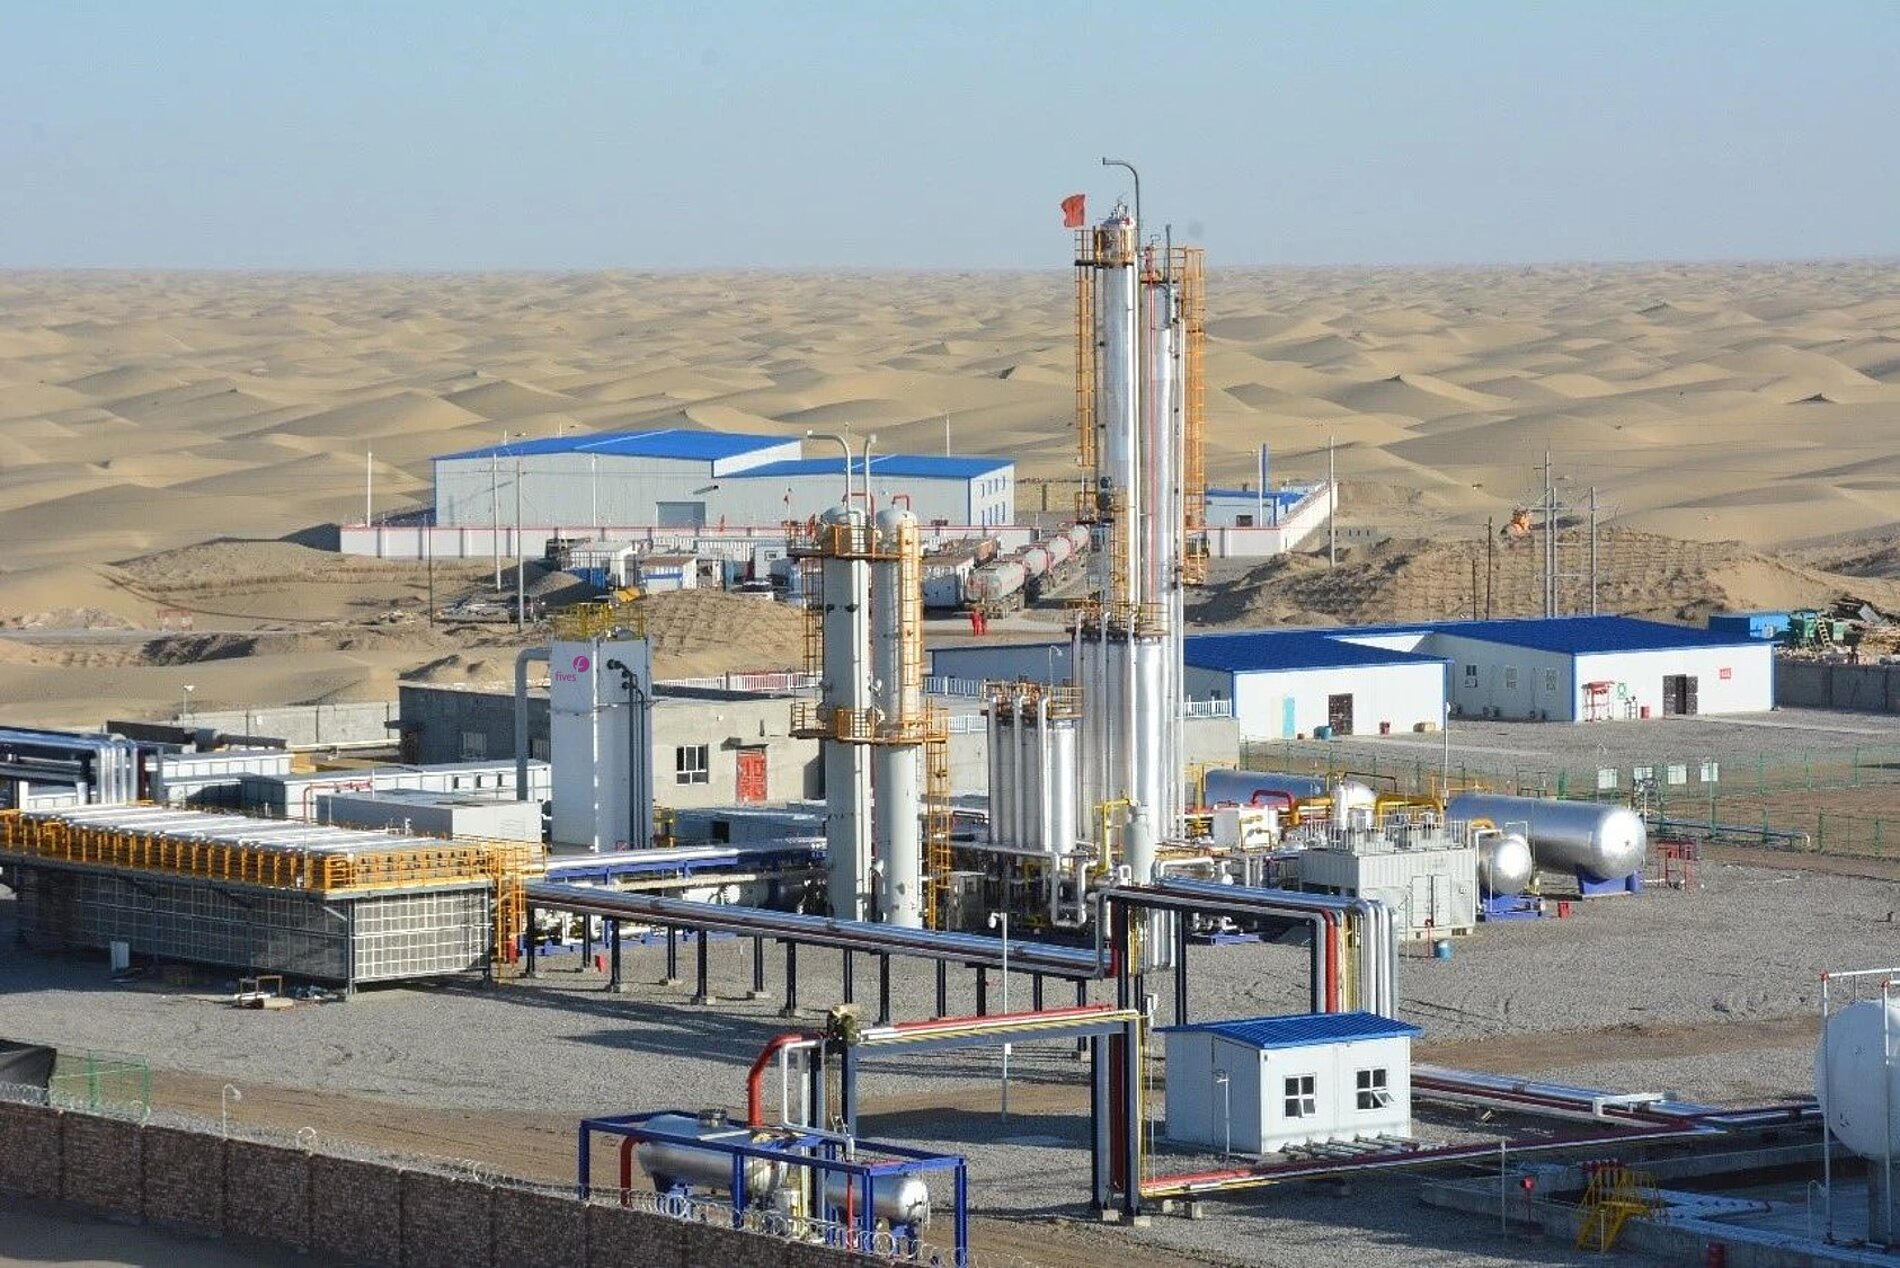 Fives cold boxes at the core of the largest LNG project in the Aksu Desert